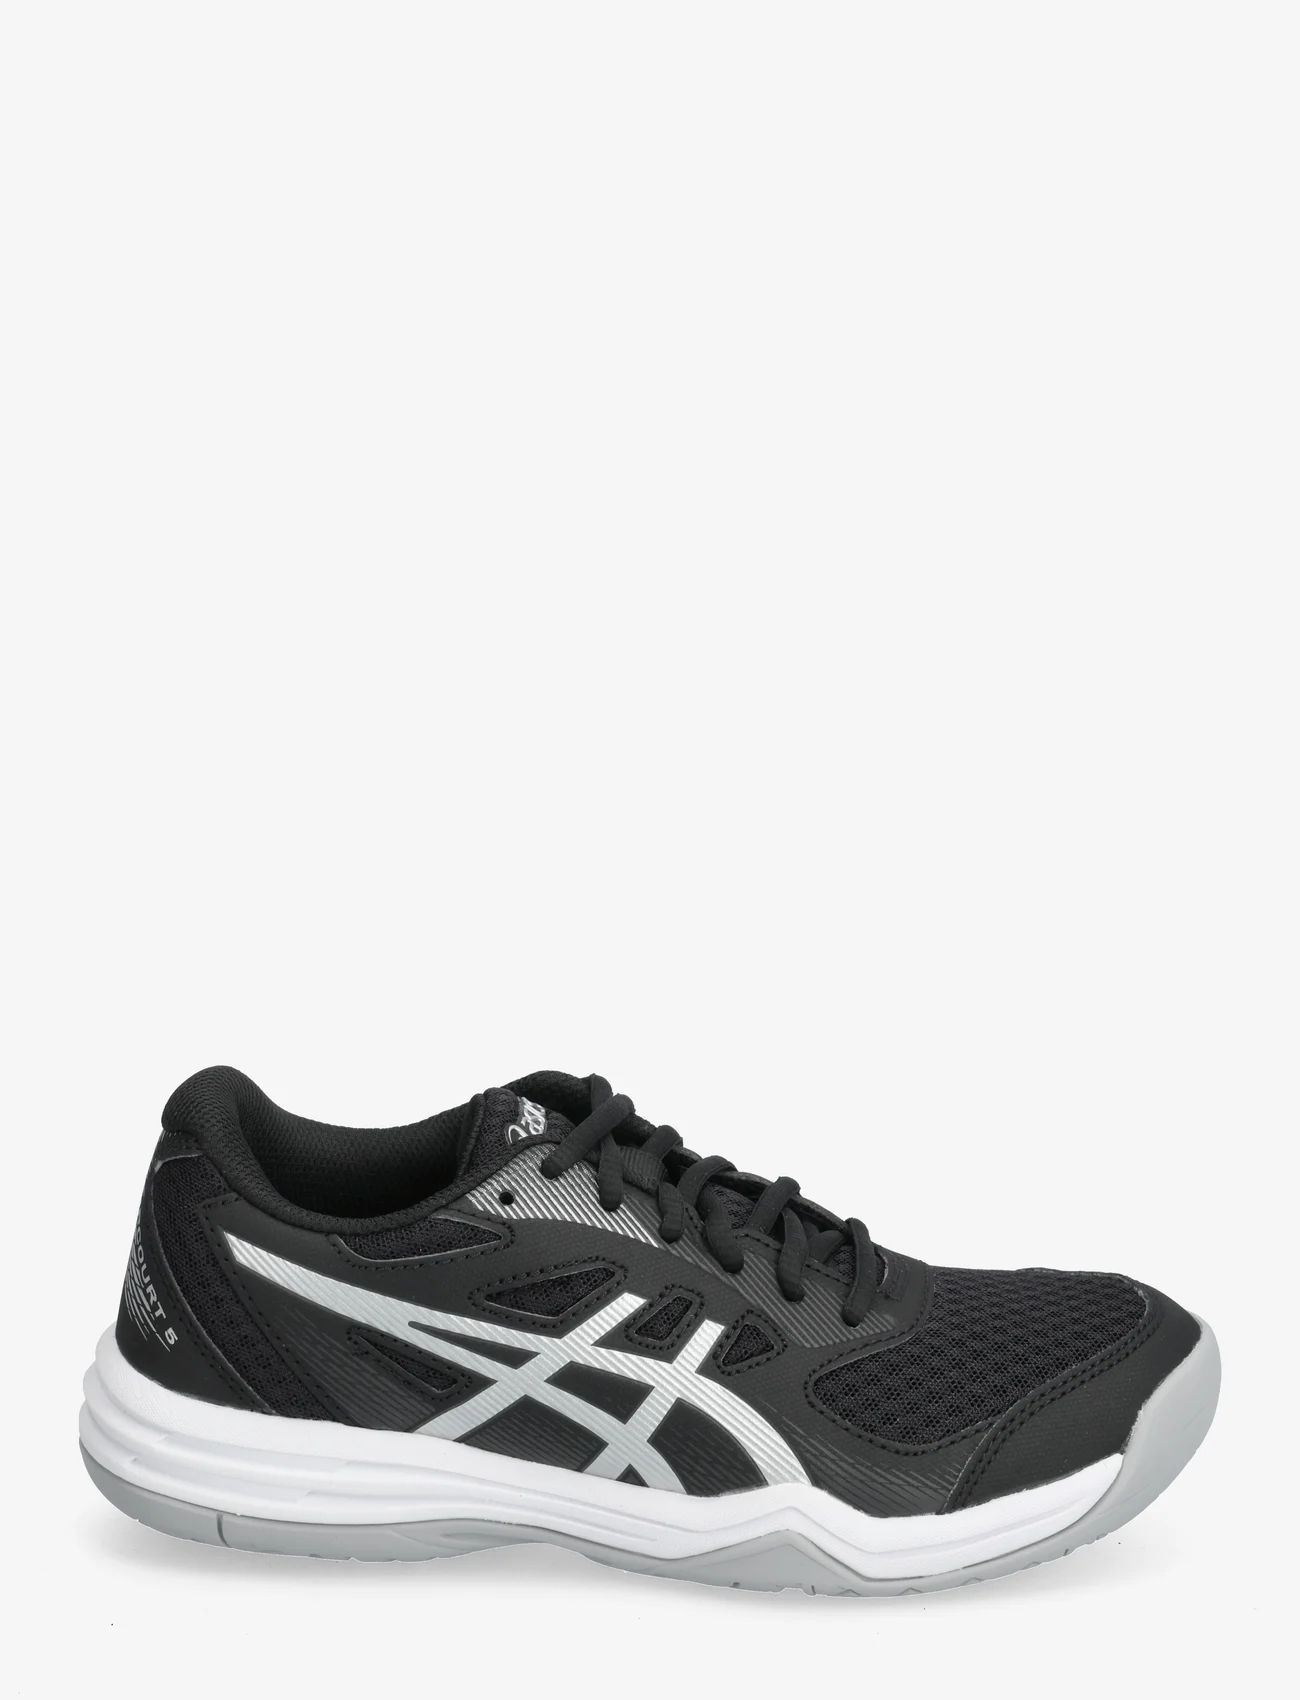 Asics - UPCOURT 5 - indoor sports shoes - black/pure silver - 1